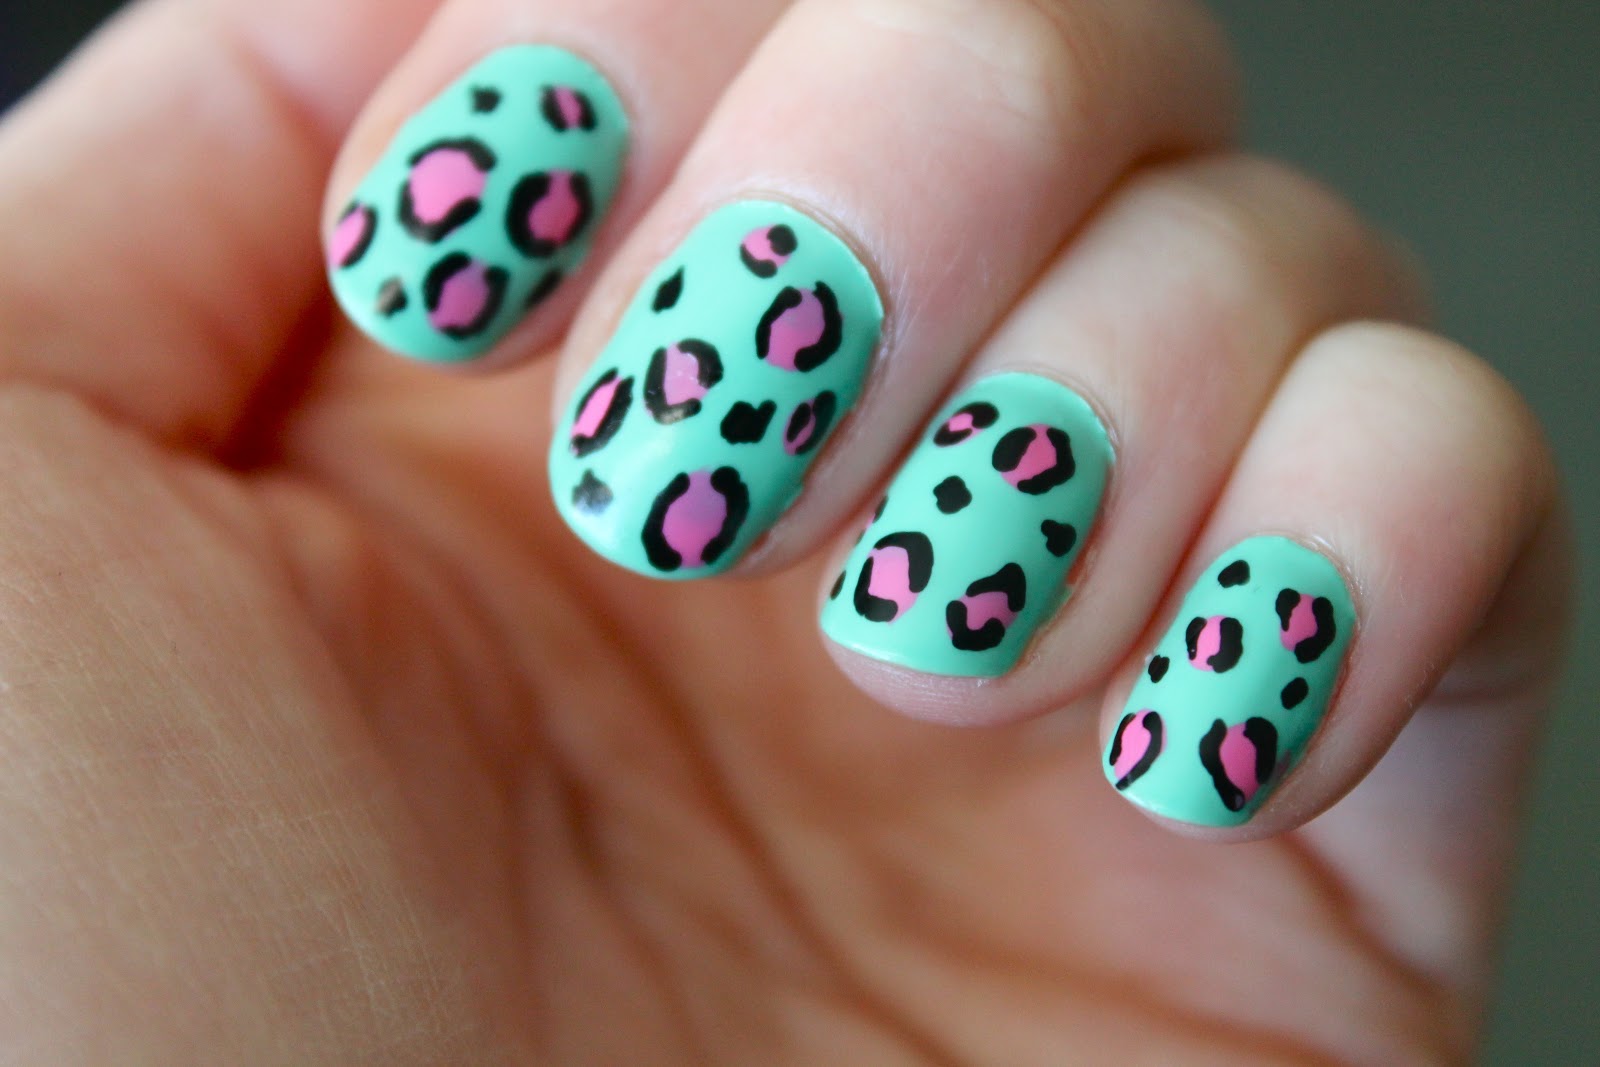 10. Adorable Animal Print Nail Designs for a Fun Twist - wide 4